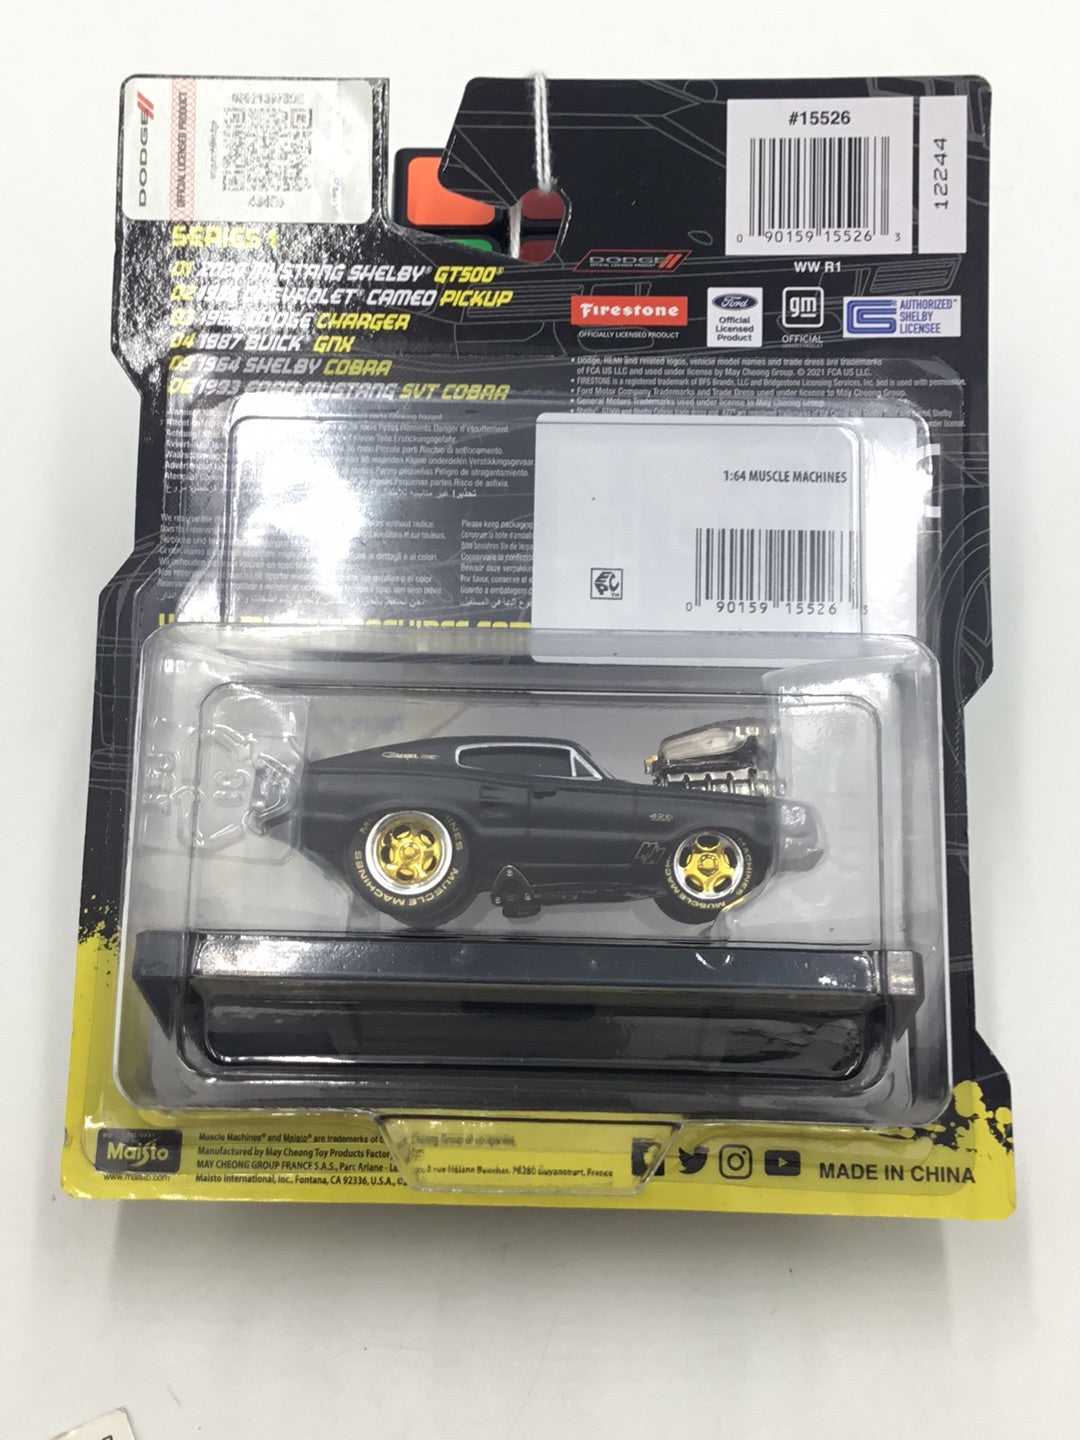 Muscle machines model #03 1966 Dodge Charger Chase